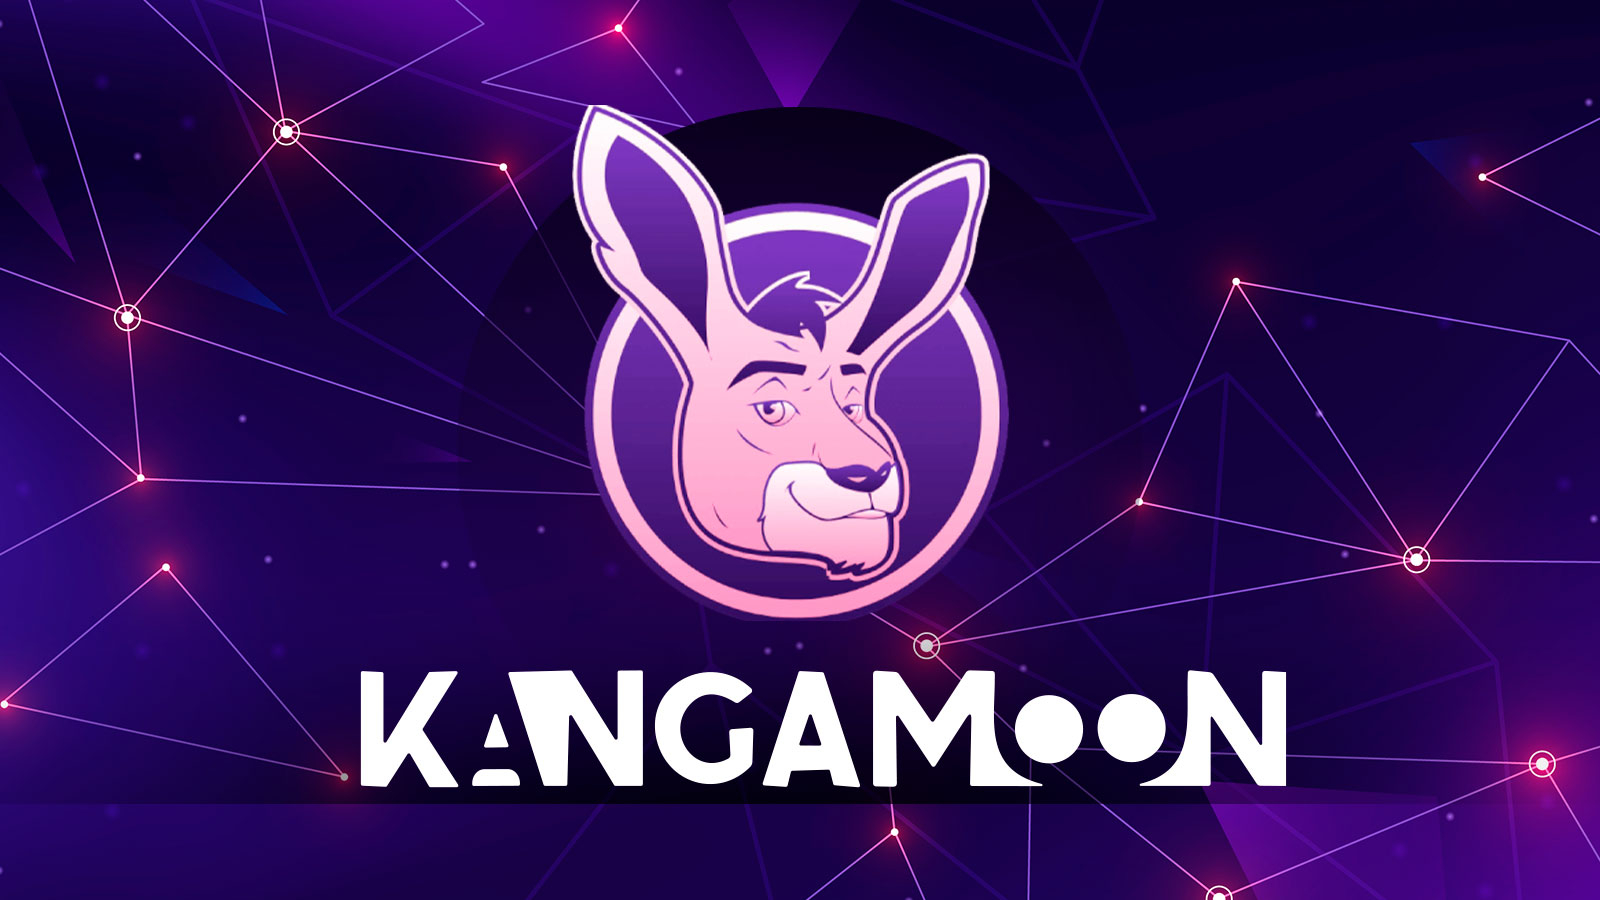 Kangamoon (KANG) Pre-Sale Might be Spotlighted by Traders in April as Ethereum (ETH), Aptos (APT) Coins Amidst Growth Leaders